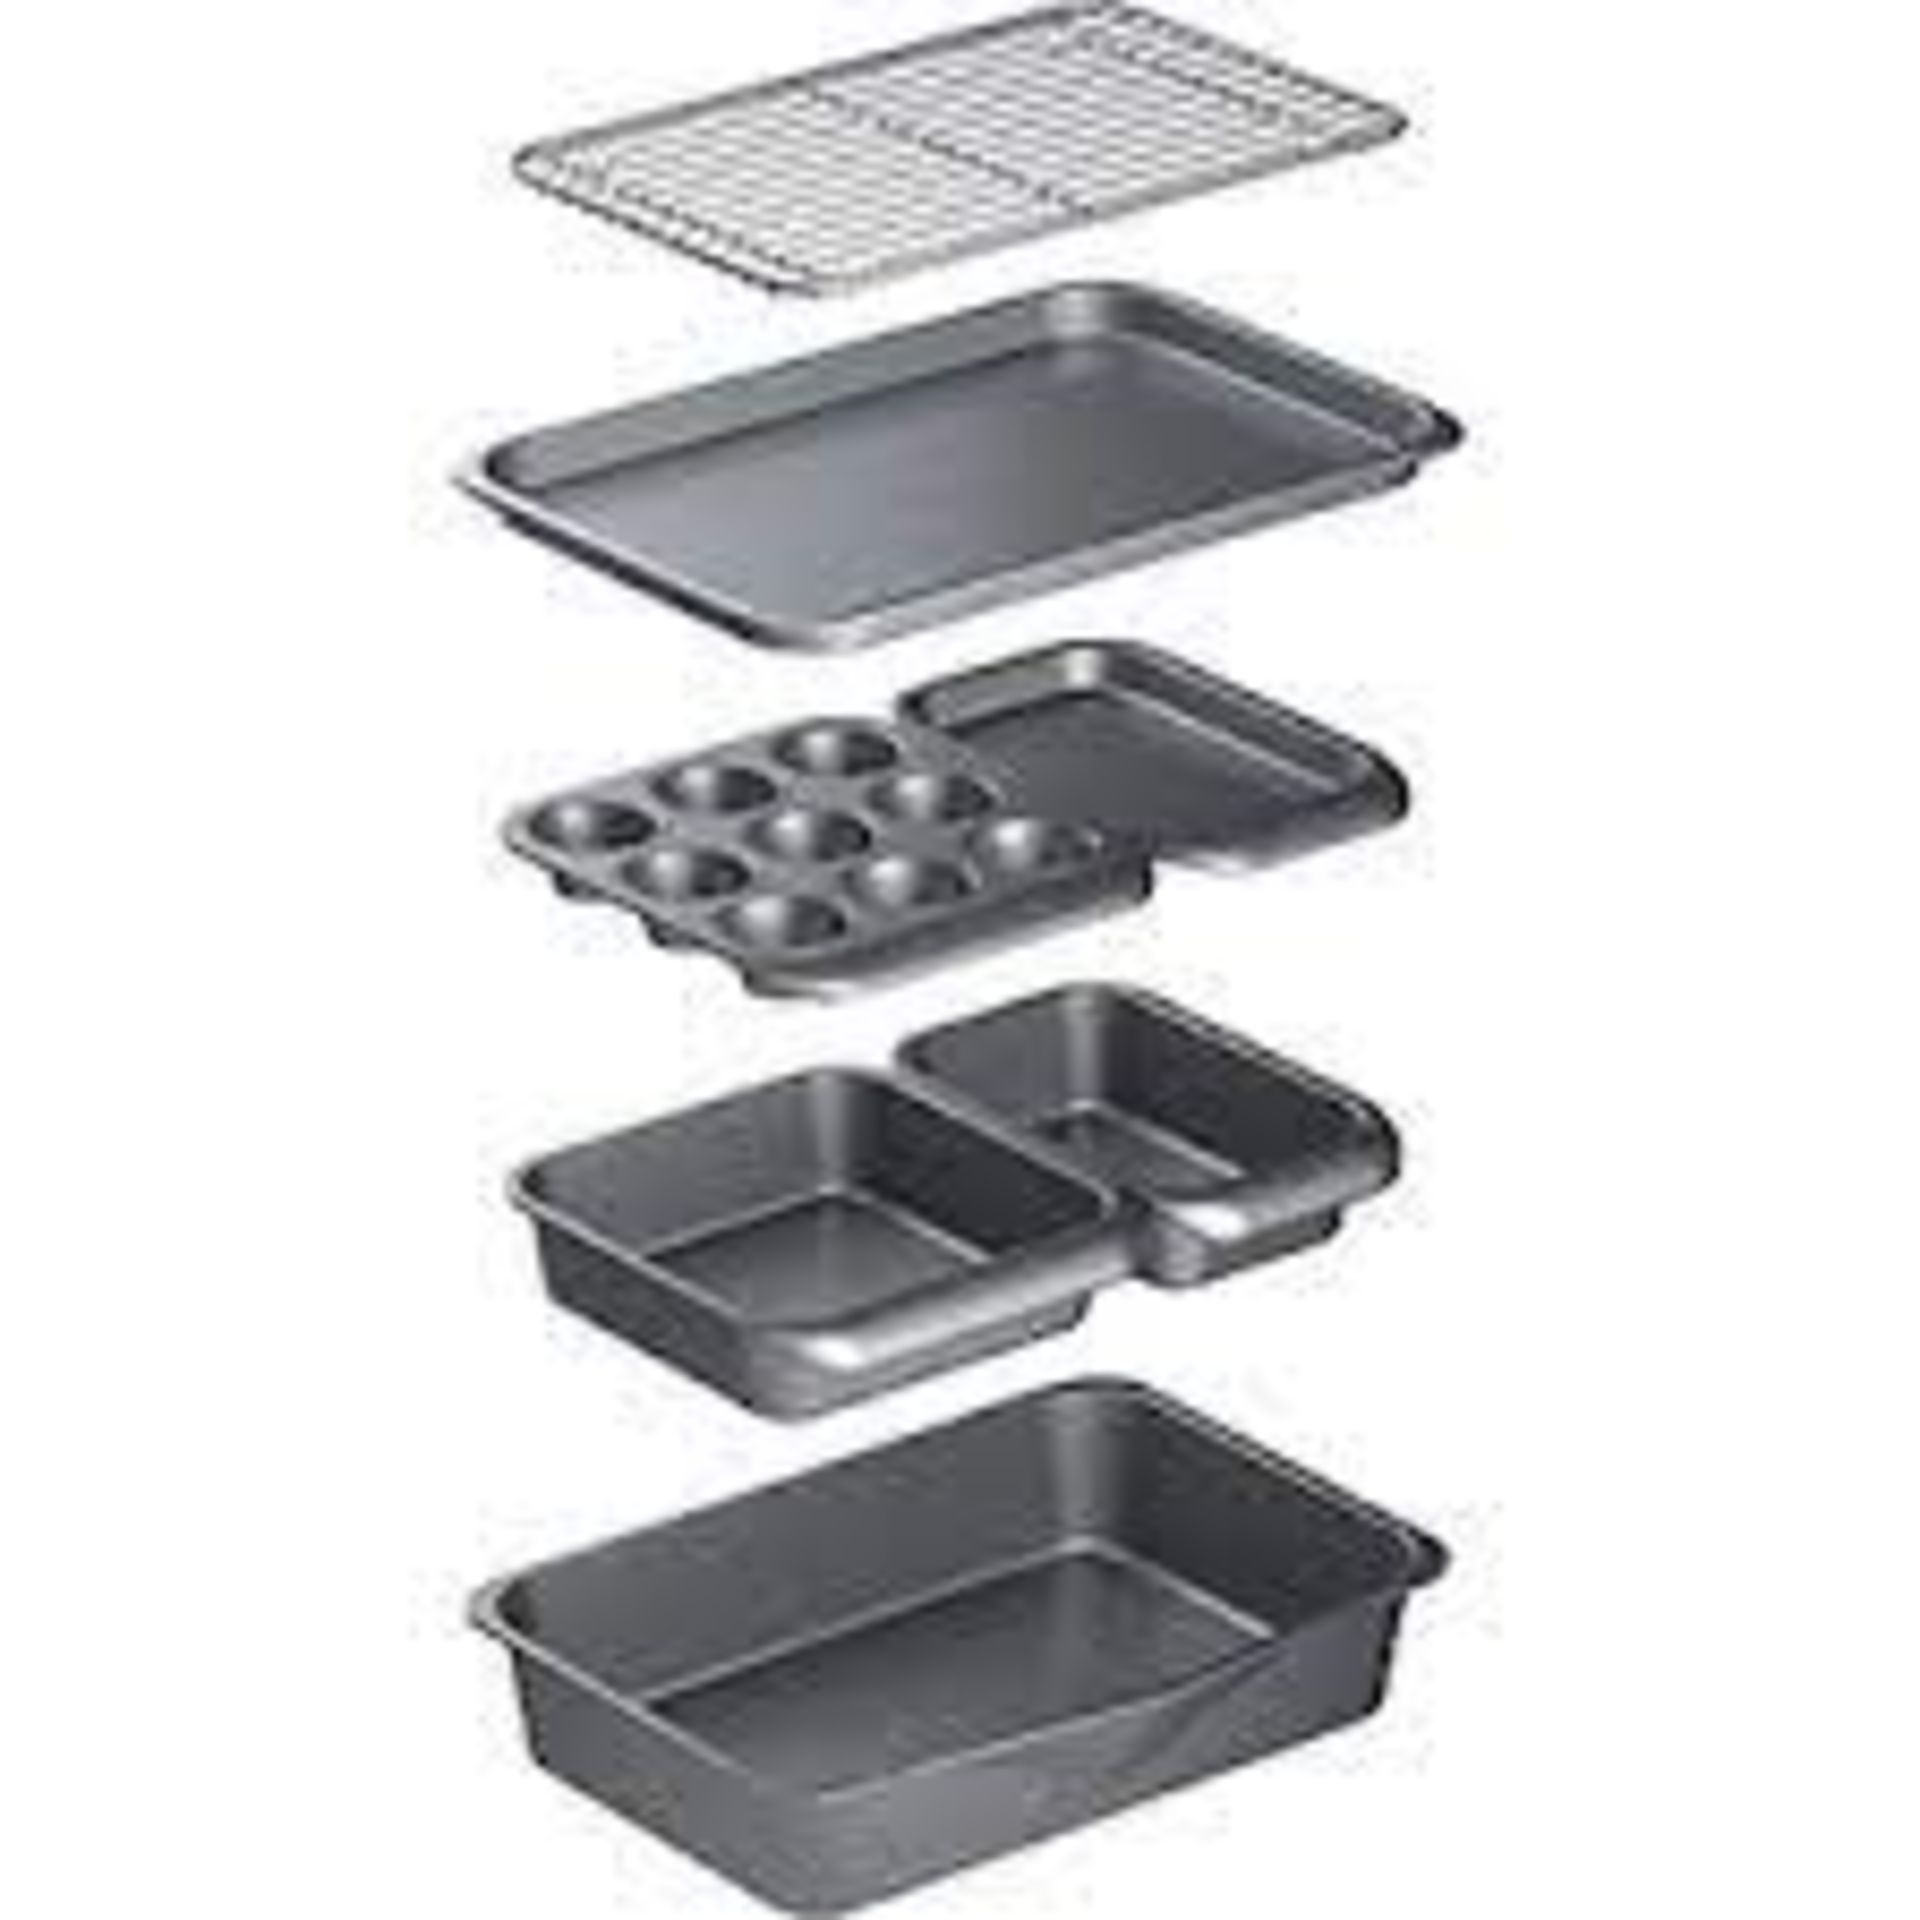 5 x NEW BOXED 7 Piece Stackable Bakeware Sets with Non Stick Baking Trays, Roasting Tin, Square Cake